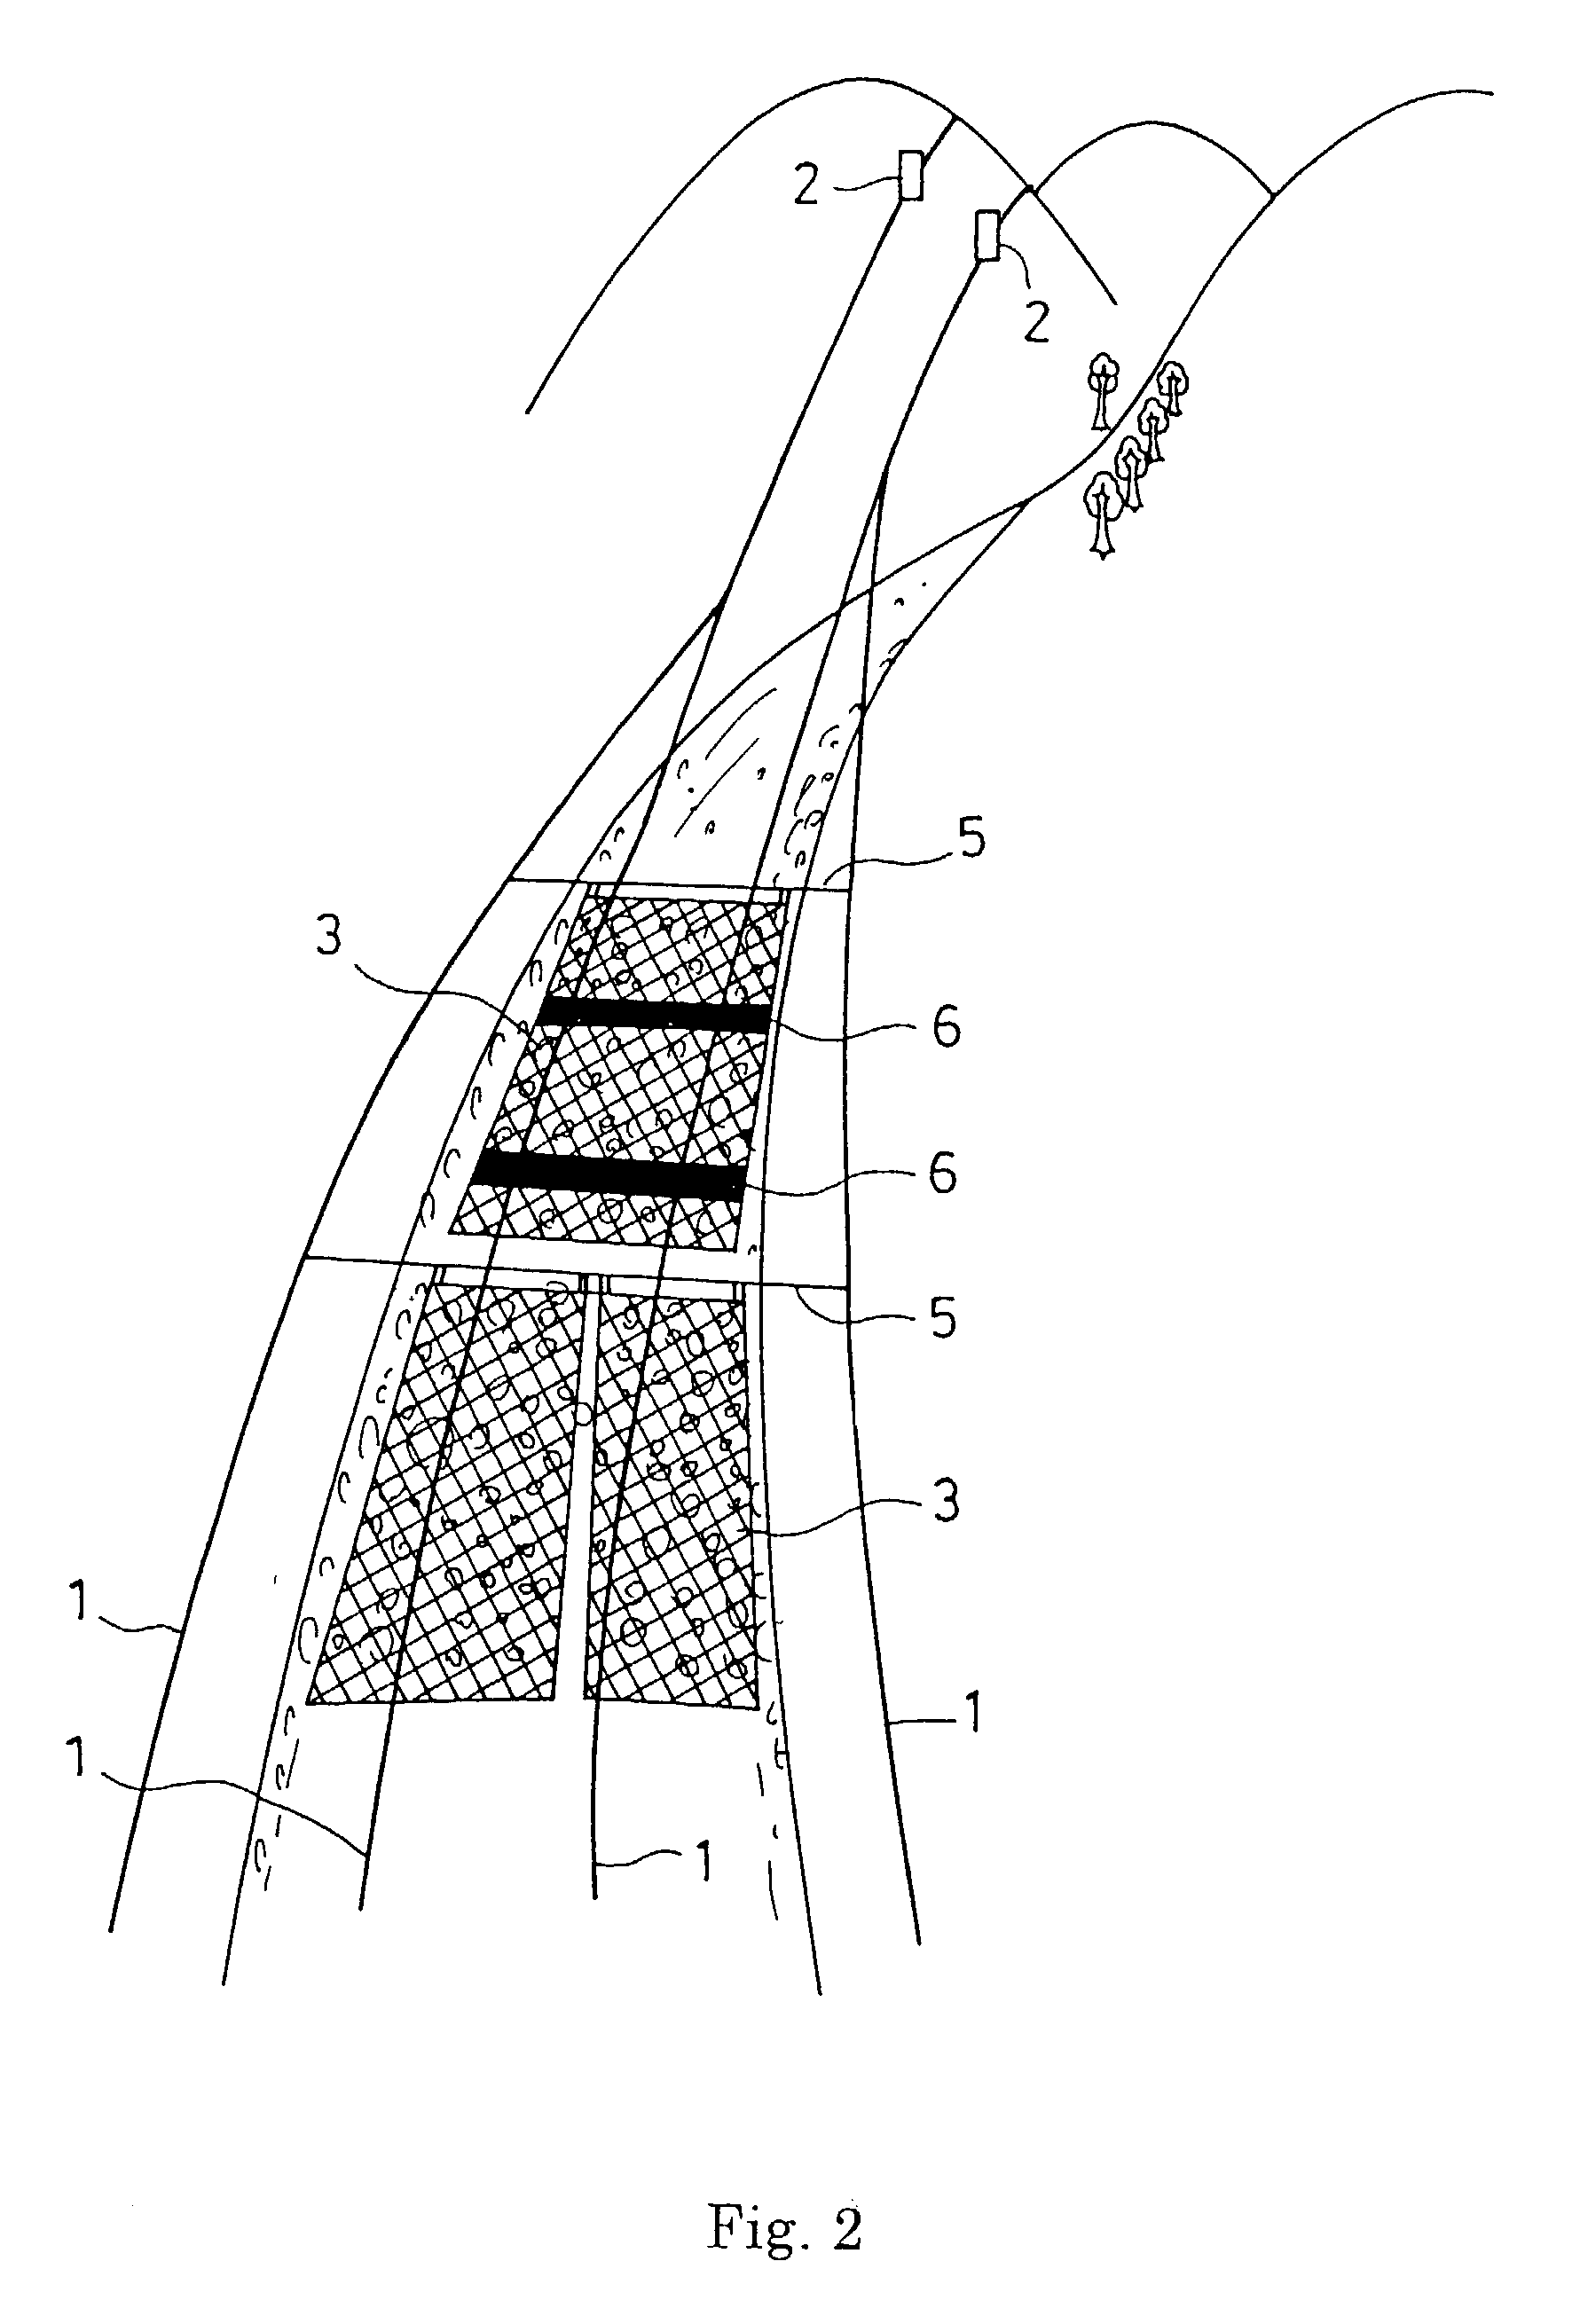 Method for soil erosion control works or shore protection works and structure for soil protection or shore protection